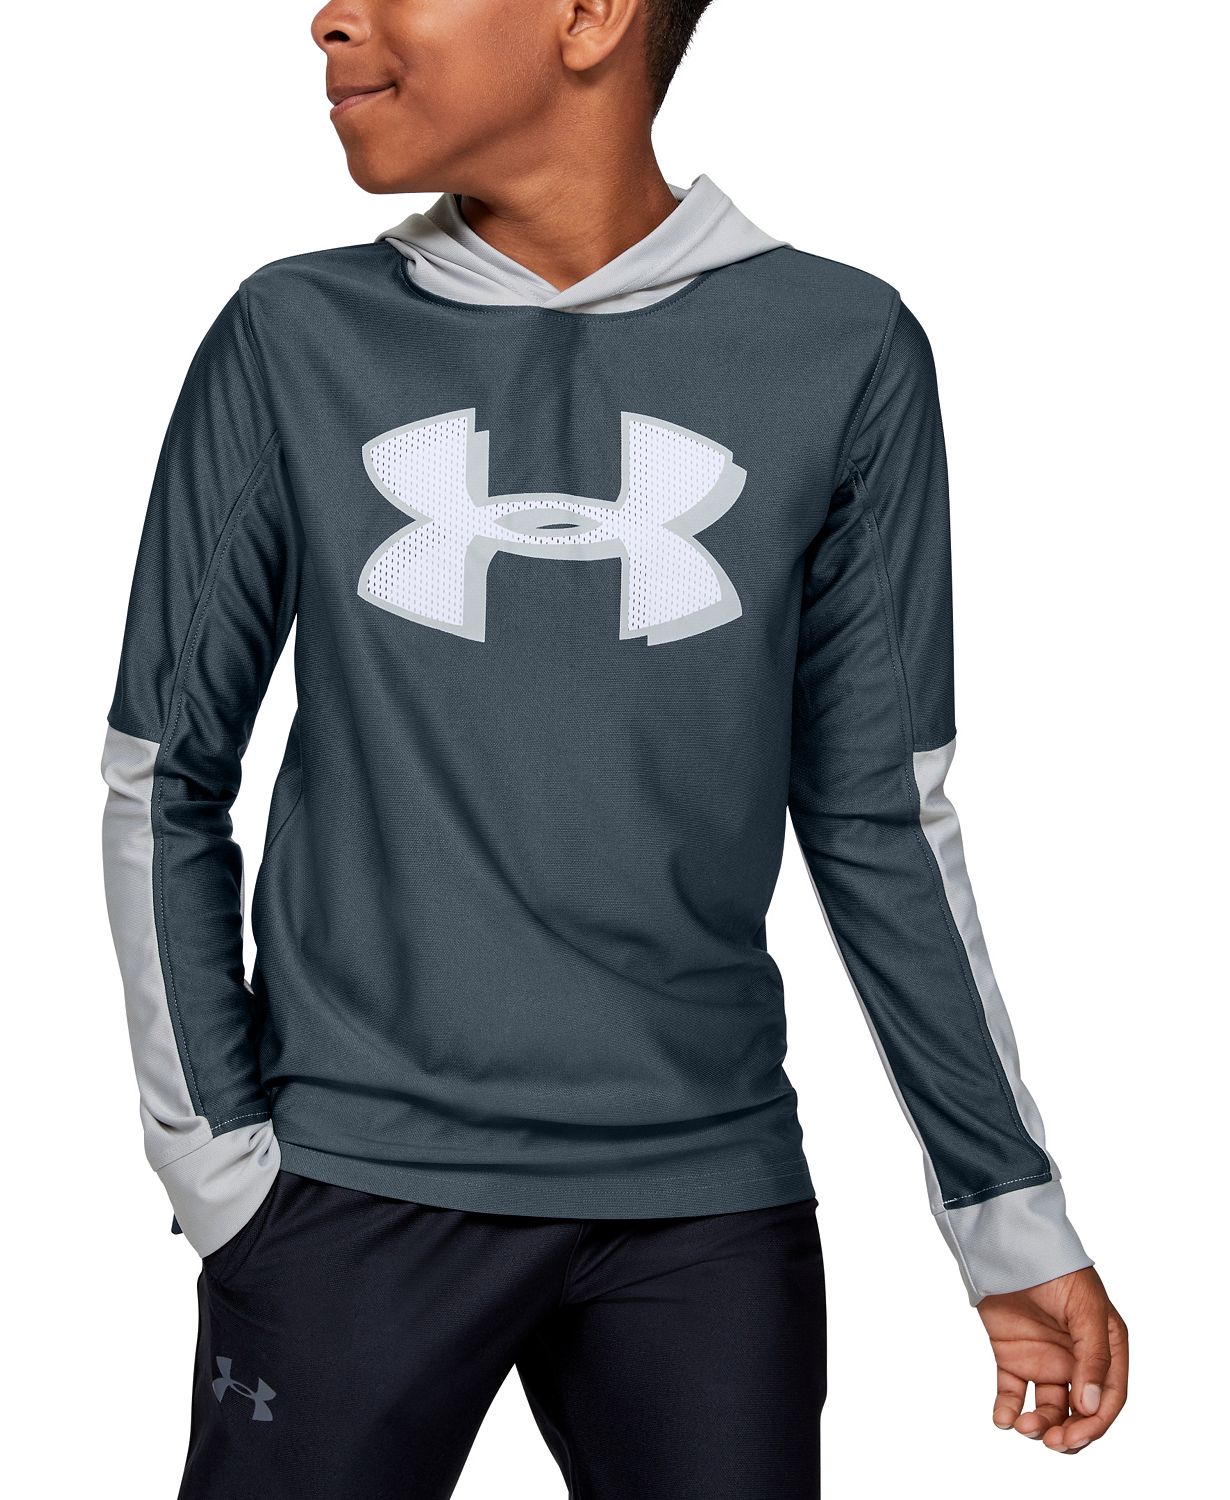 *HOT!* Macy’s – Under Armour Boys Apparel on Clearance (LAST ACT) + FREE Shipping with $25 ...